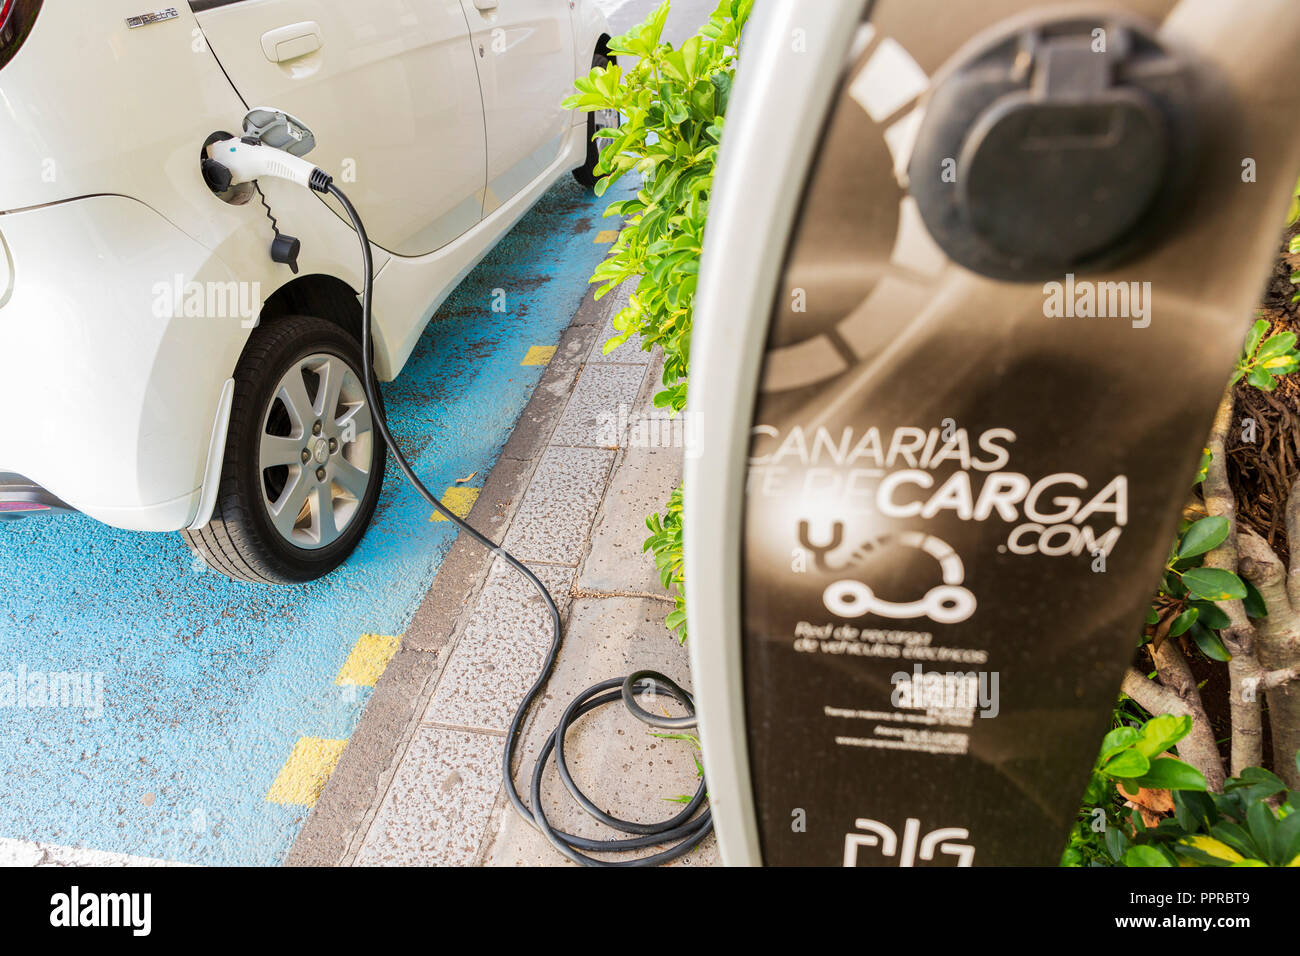 Peugeot Ion electric car plugged in at a public charching station on the street in Santa Cruz de La Palma, Canary Islands, Spain Stock Photo